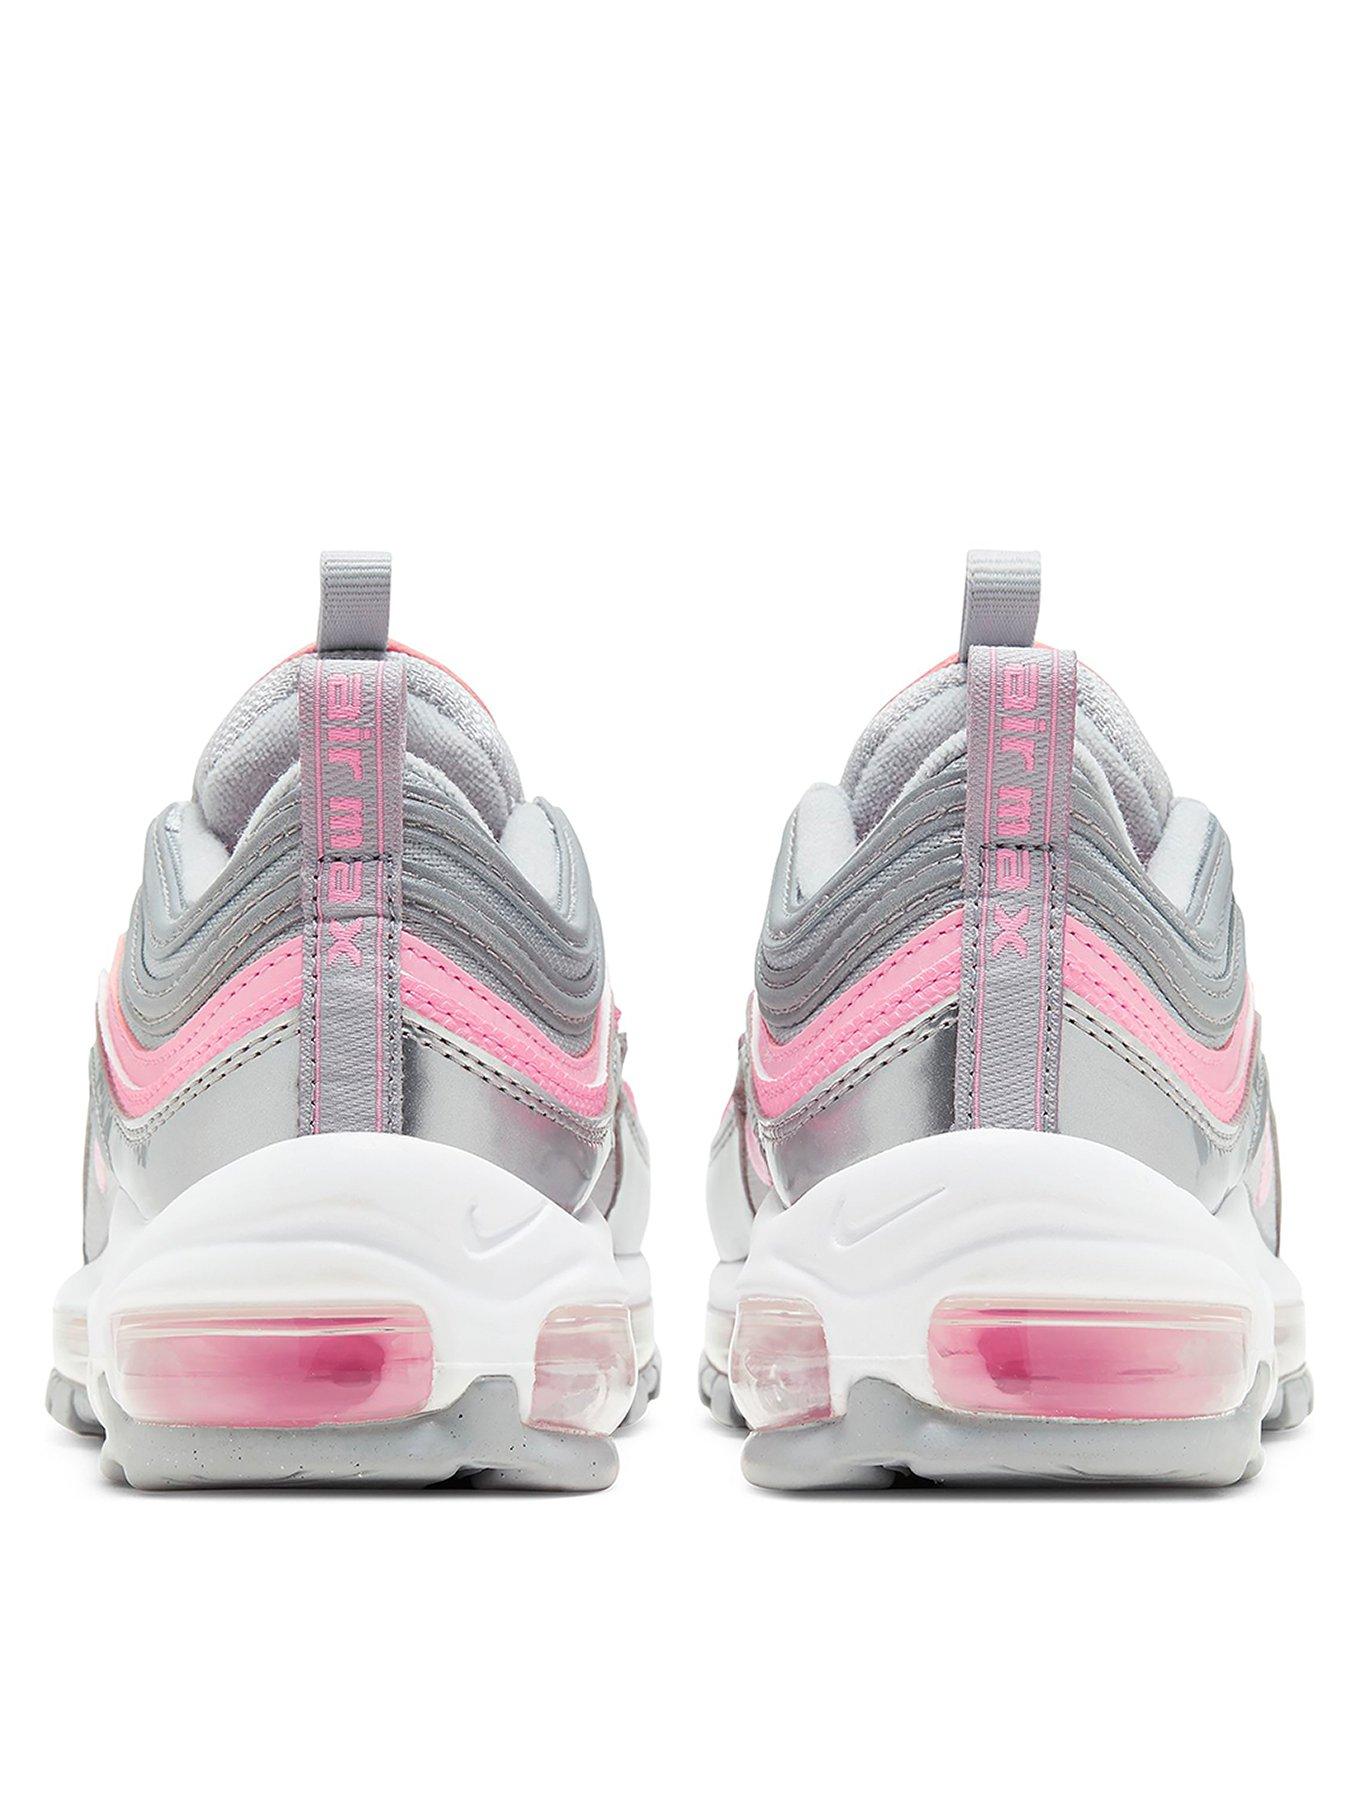 nike grey and pink air max 97 trainers